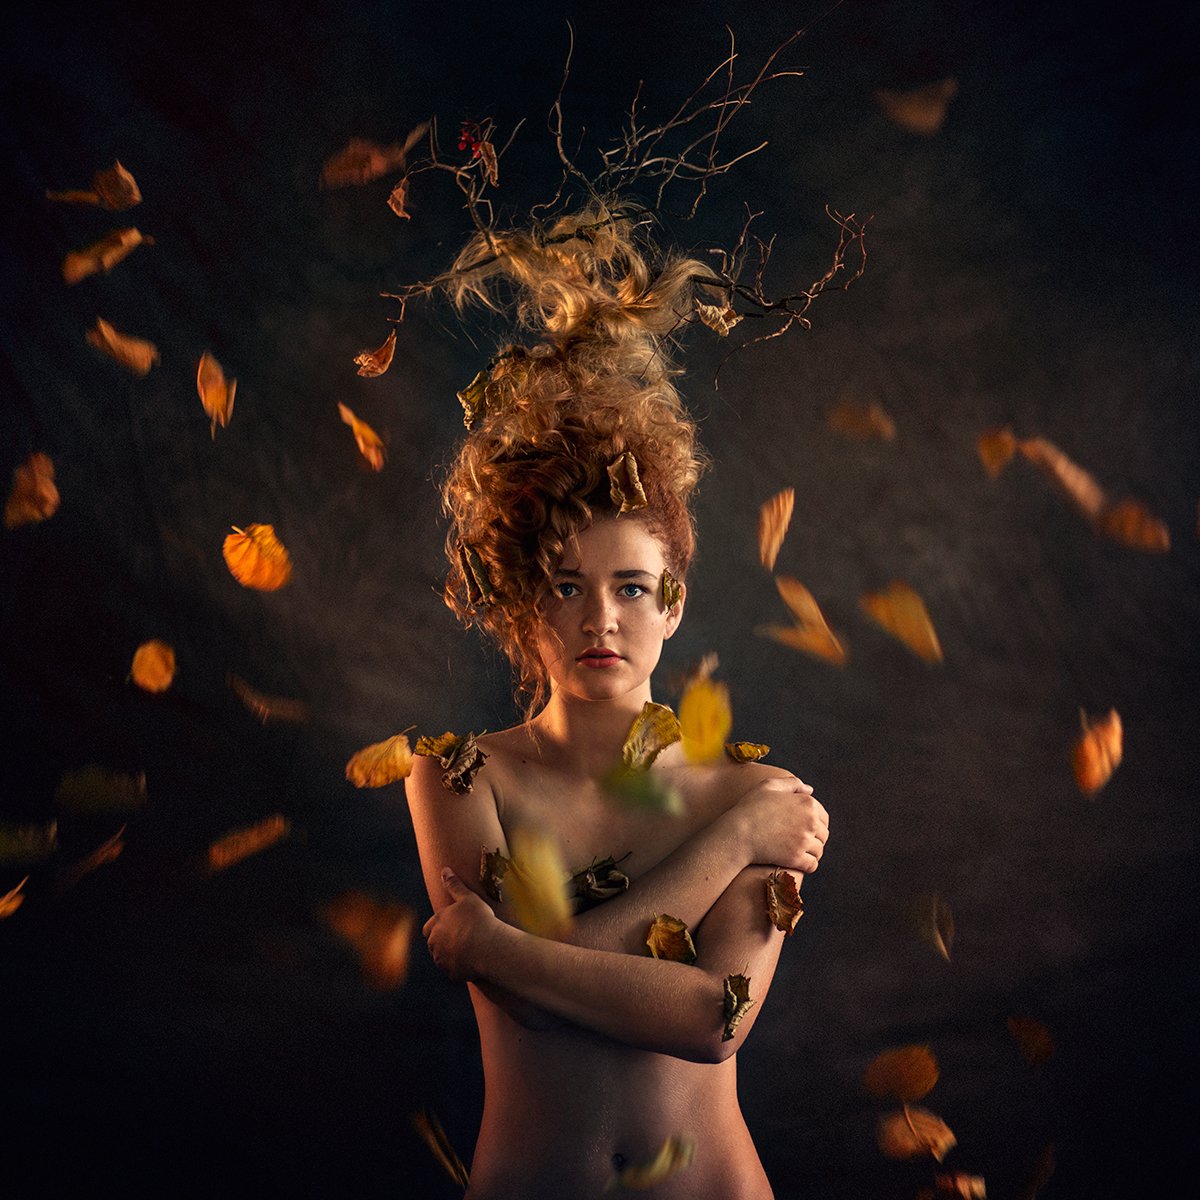 Michal Zahornacky's Telling and Surreal Portraits (NSFW)